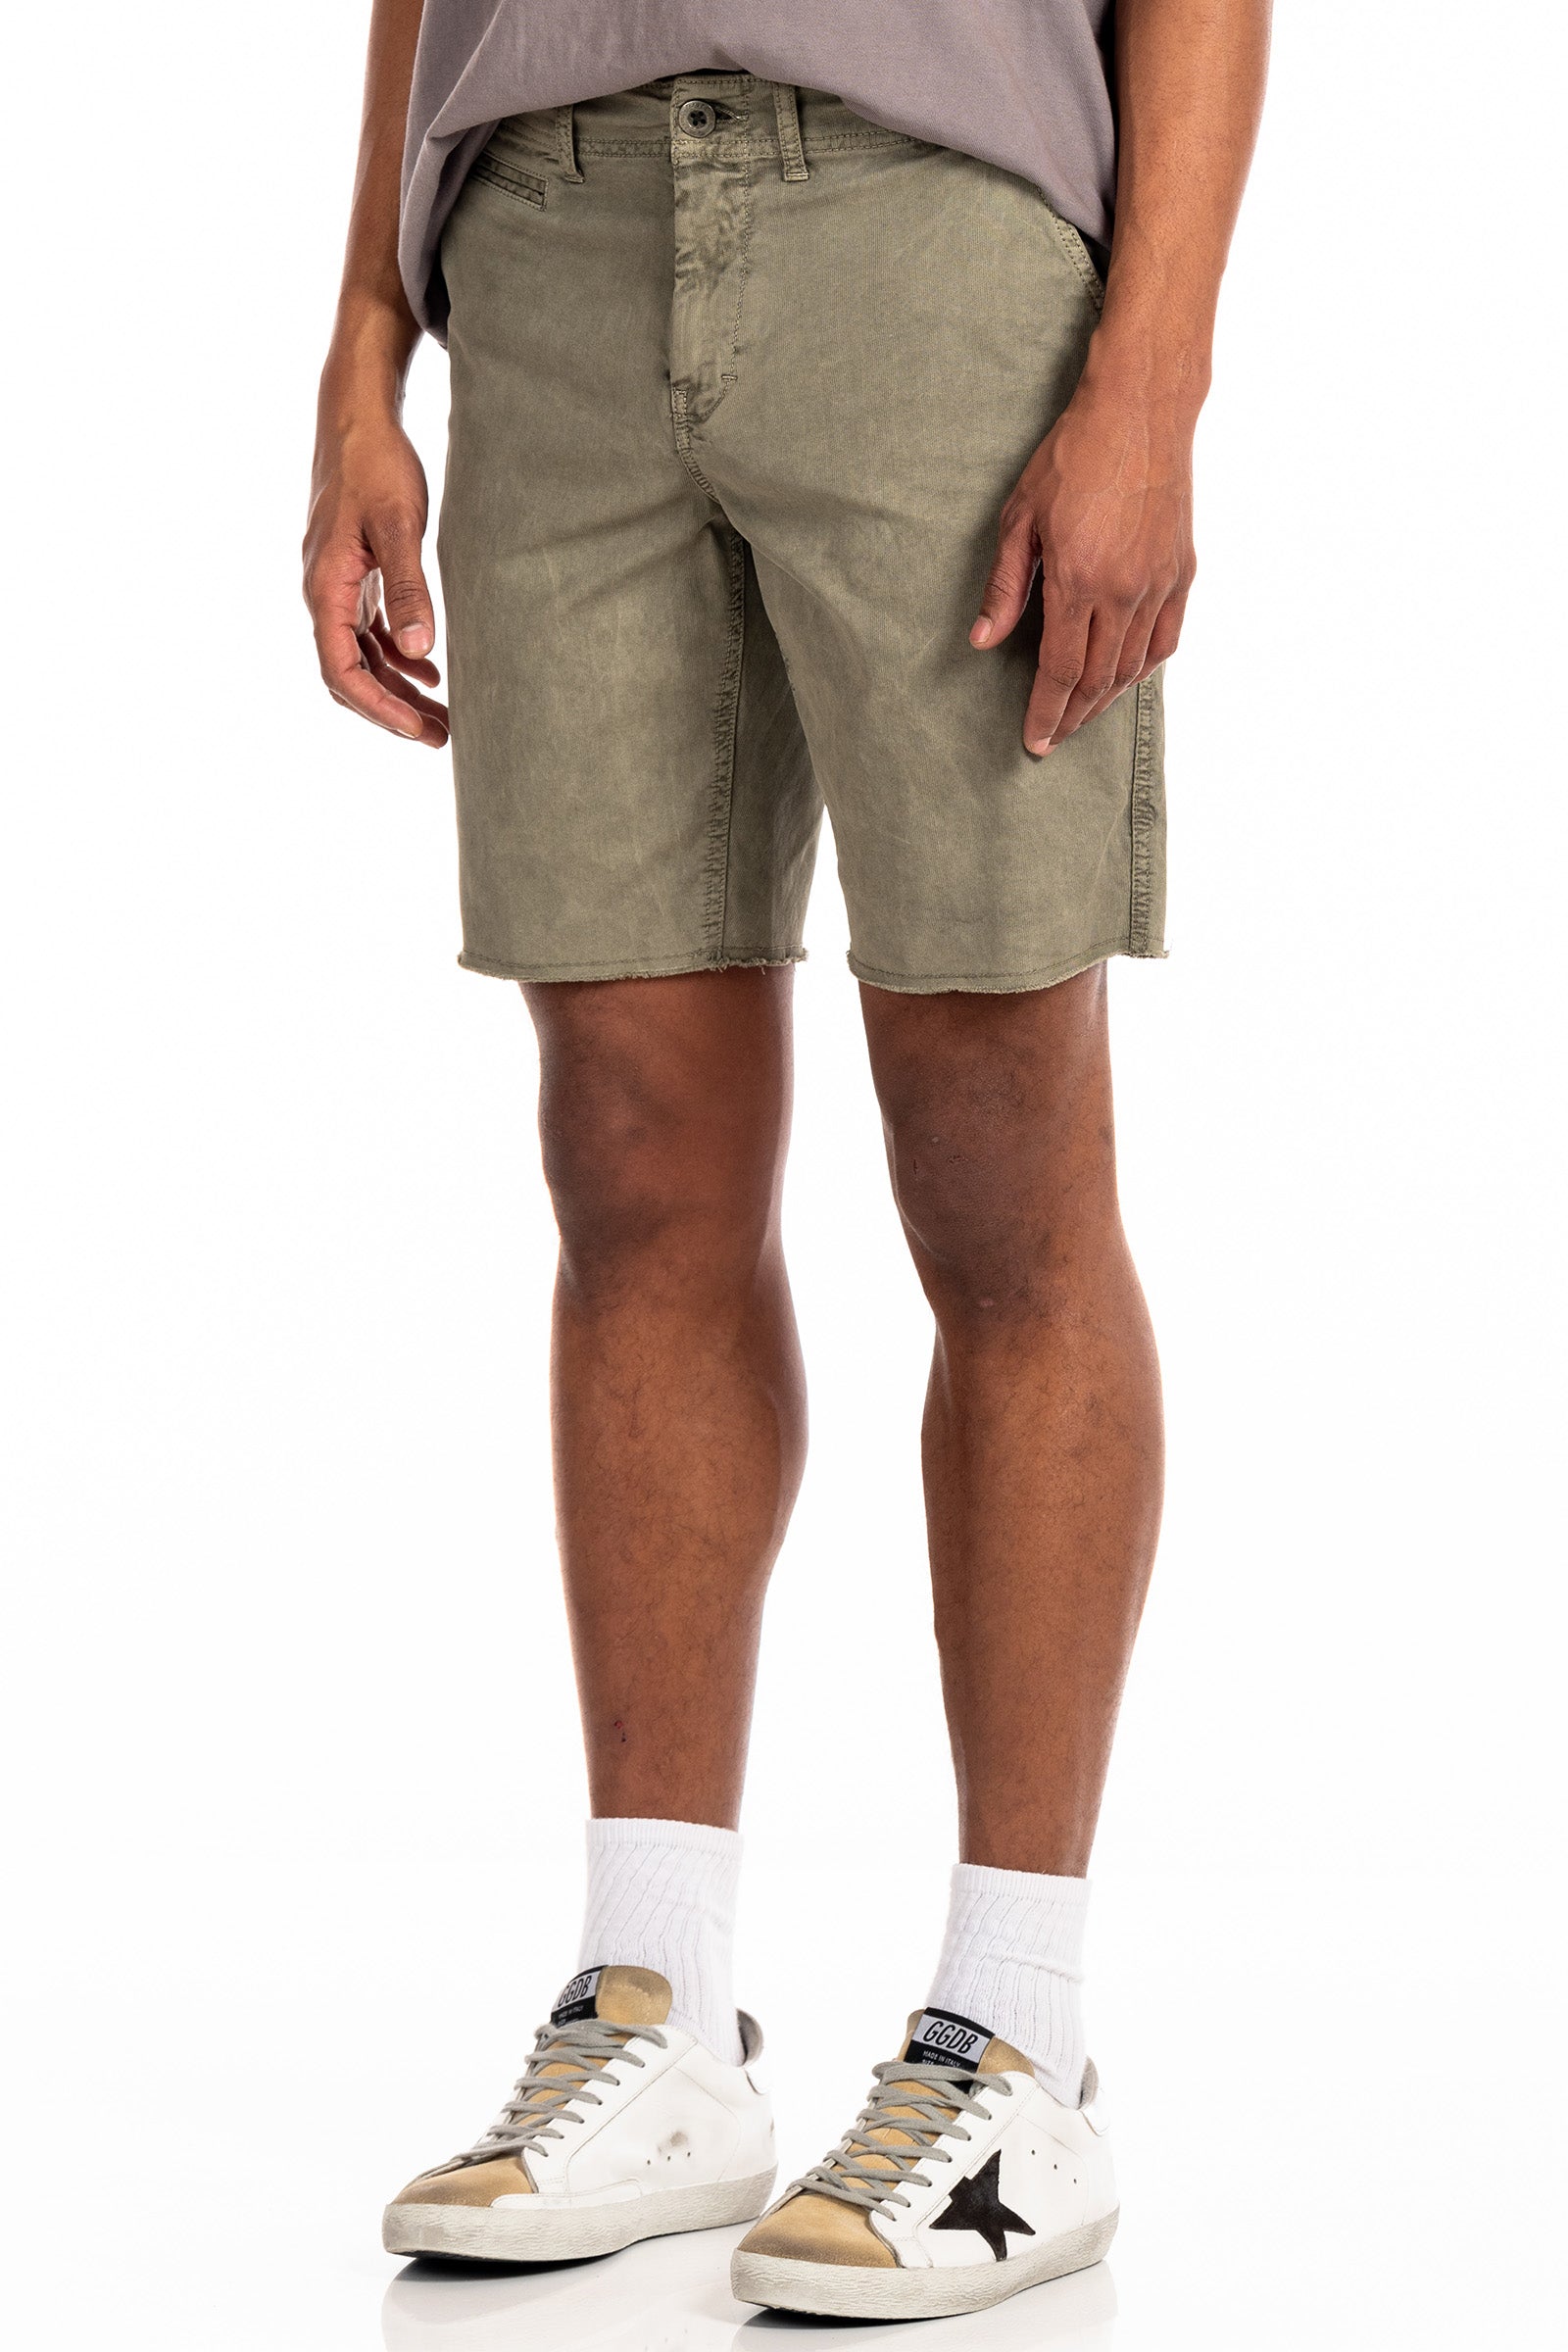 Original Paperbacks Brentwood Chino Short in Olive on Model Cropped Side View